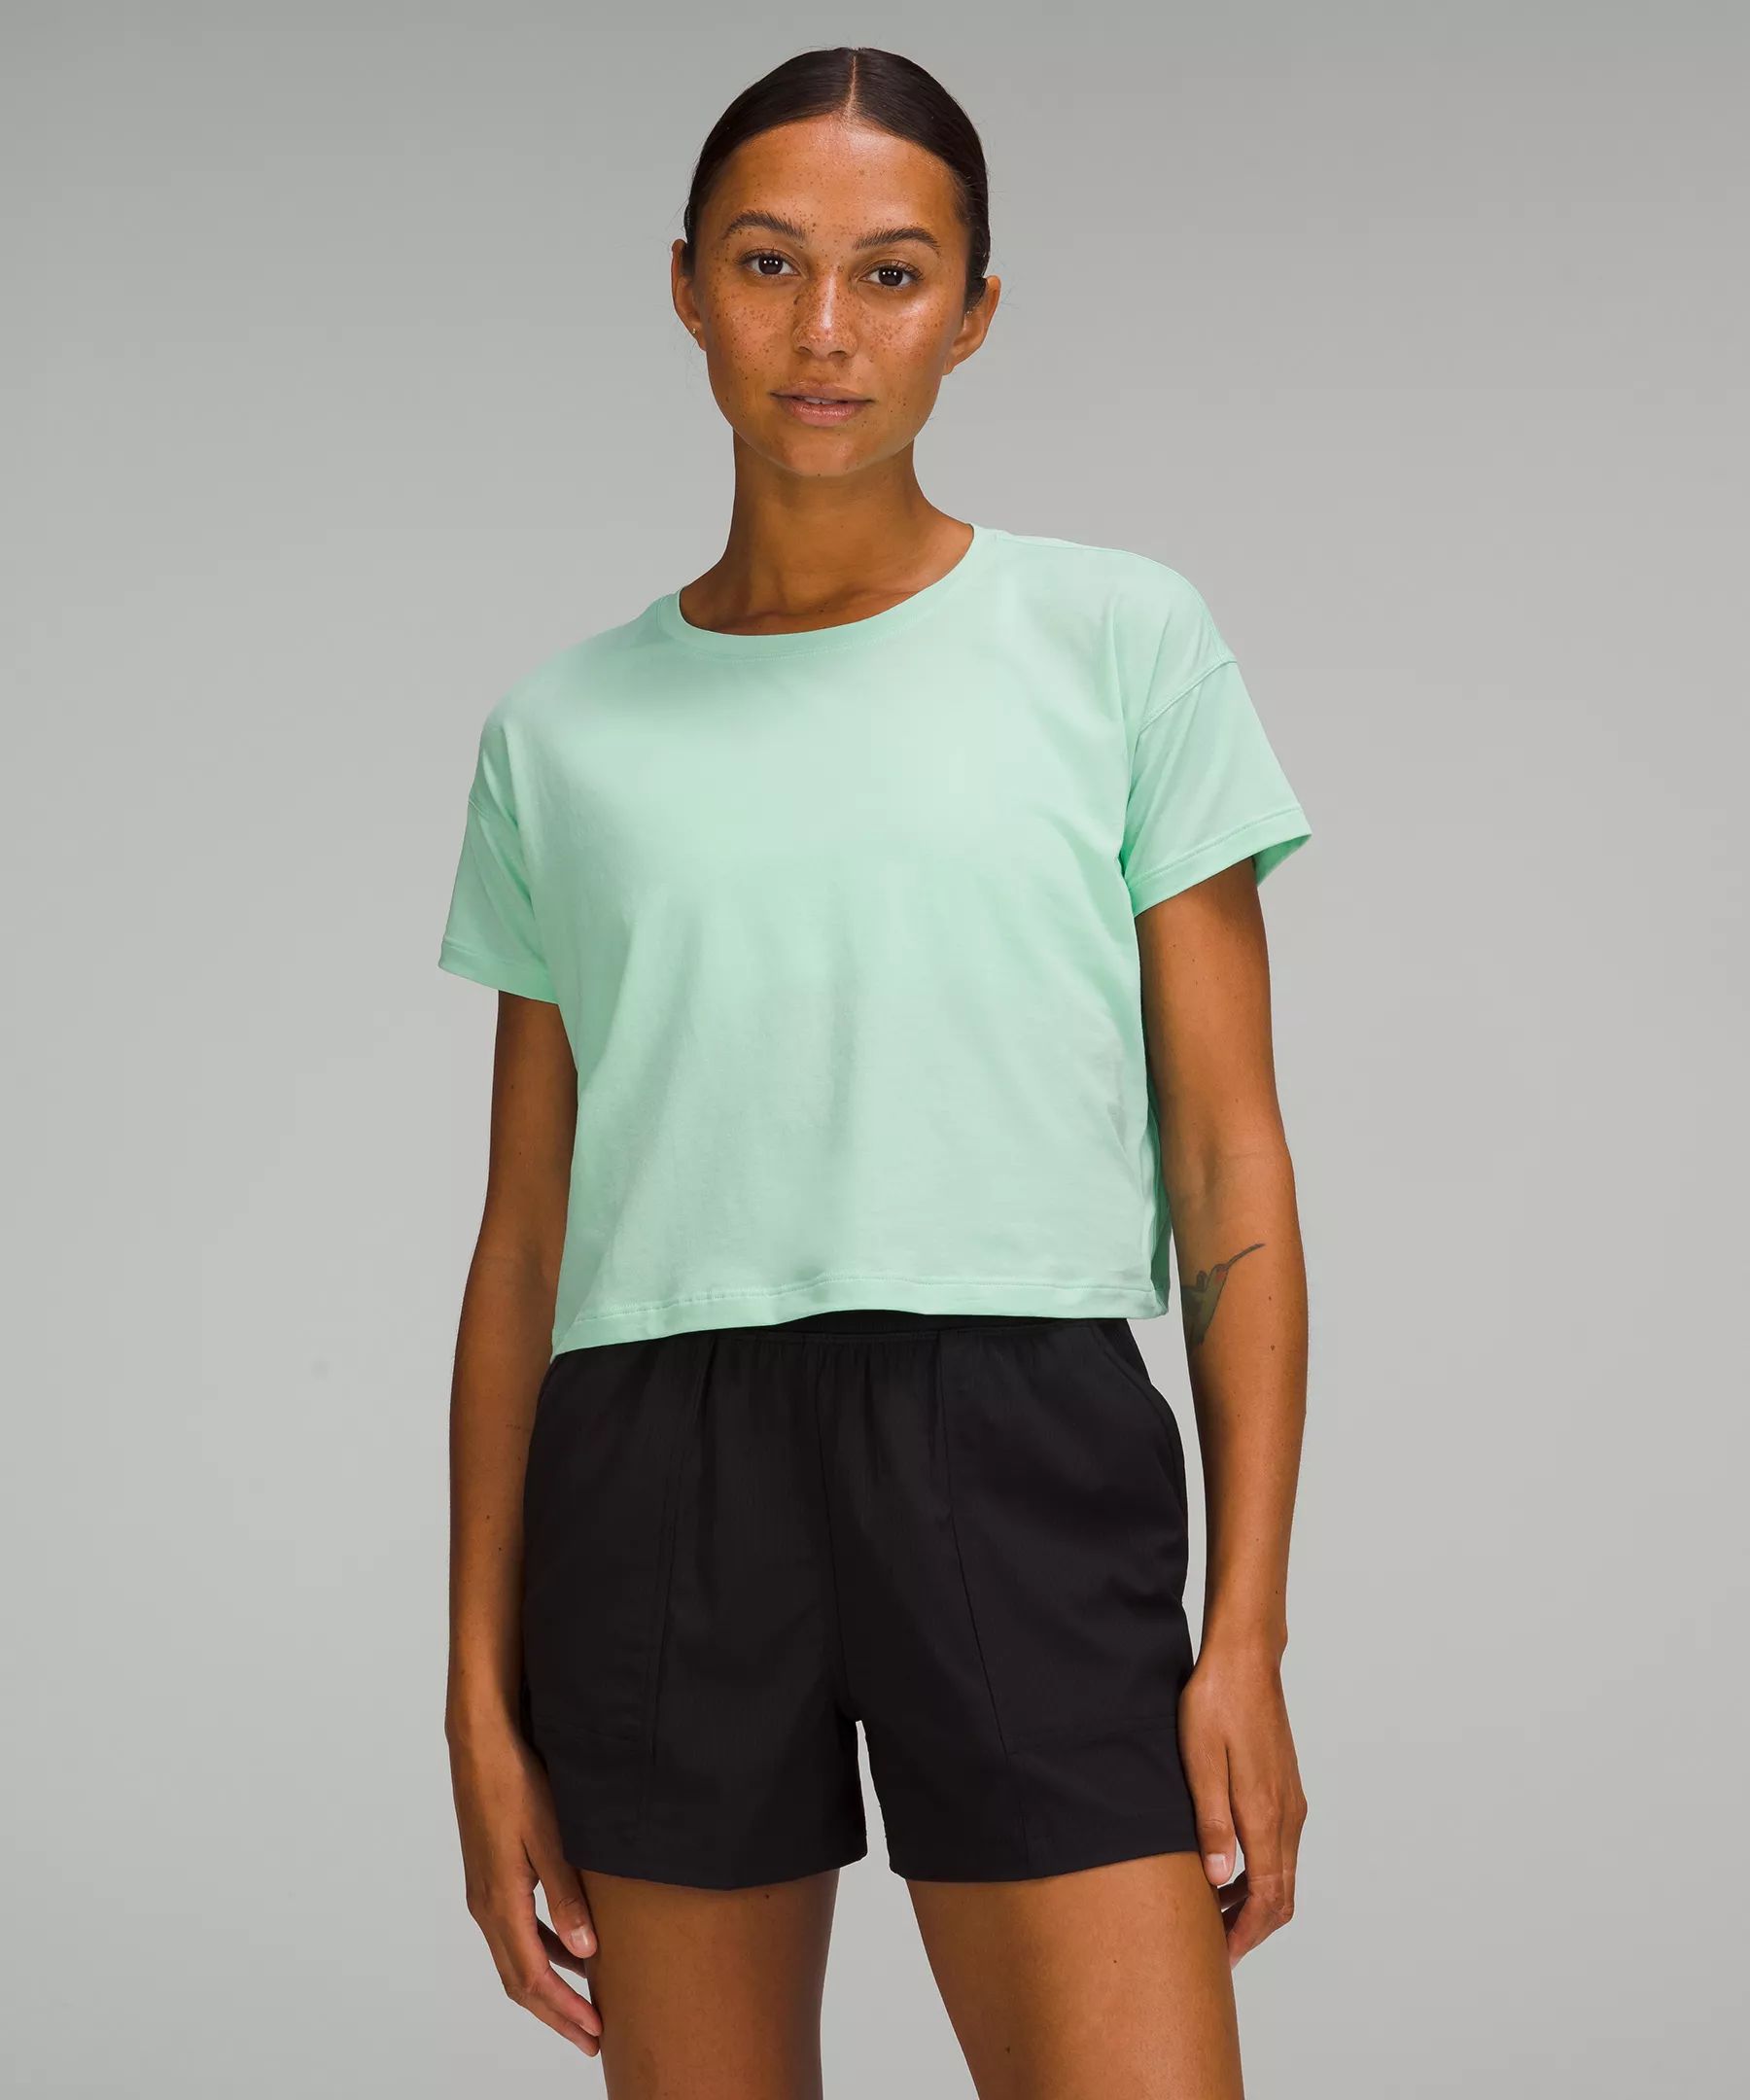 Cates T-Shirt Online Only | Lululemon (US)